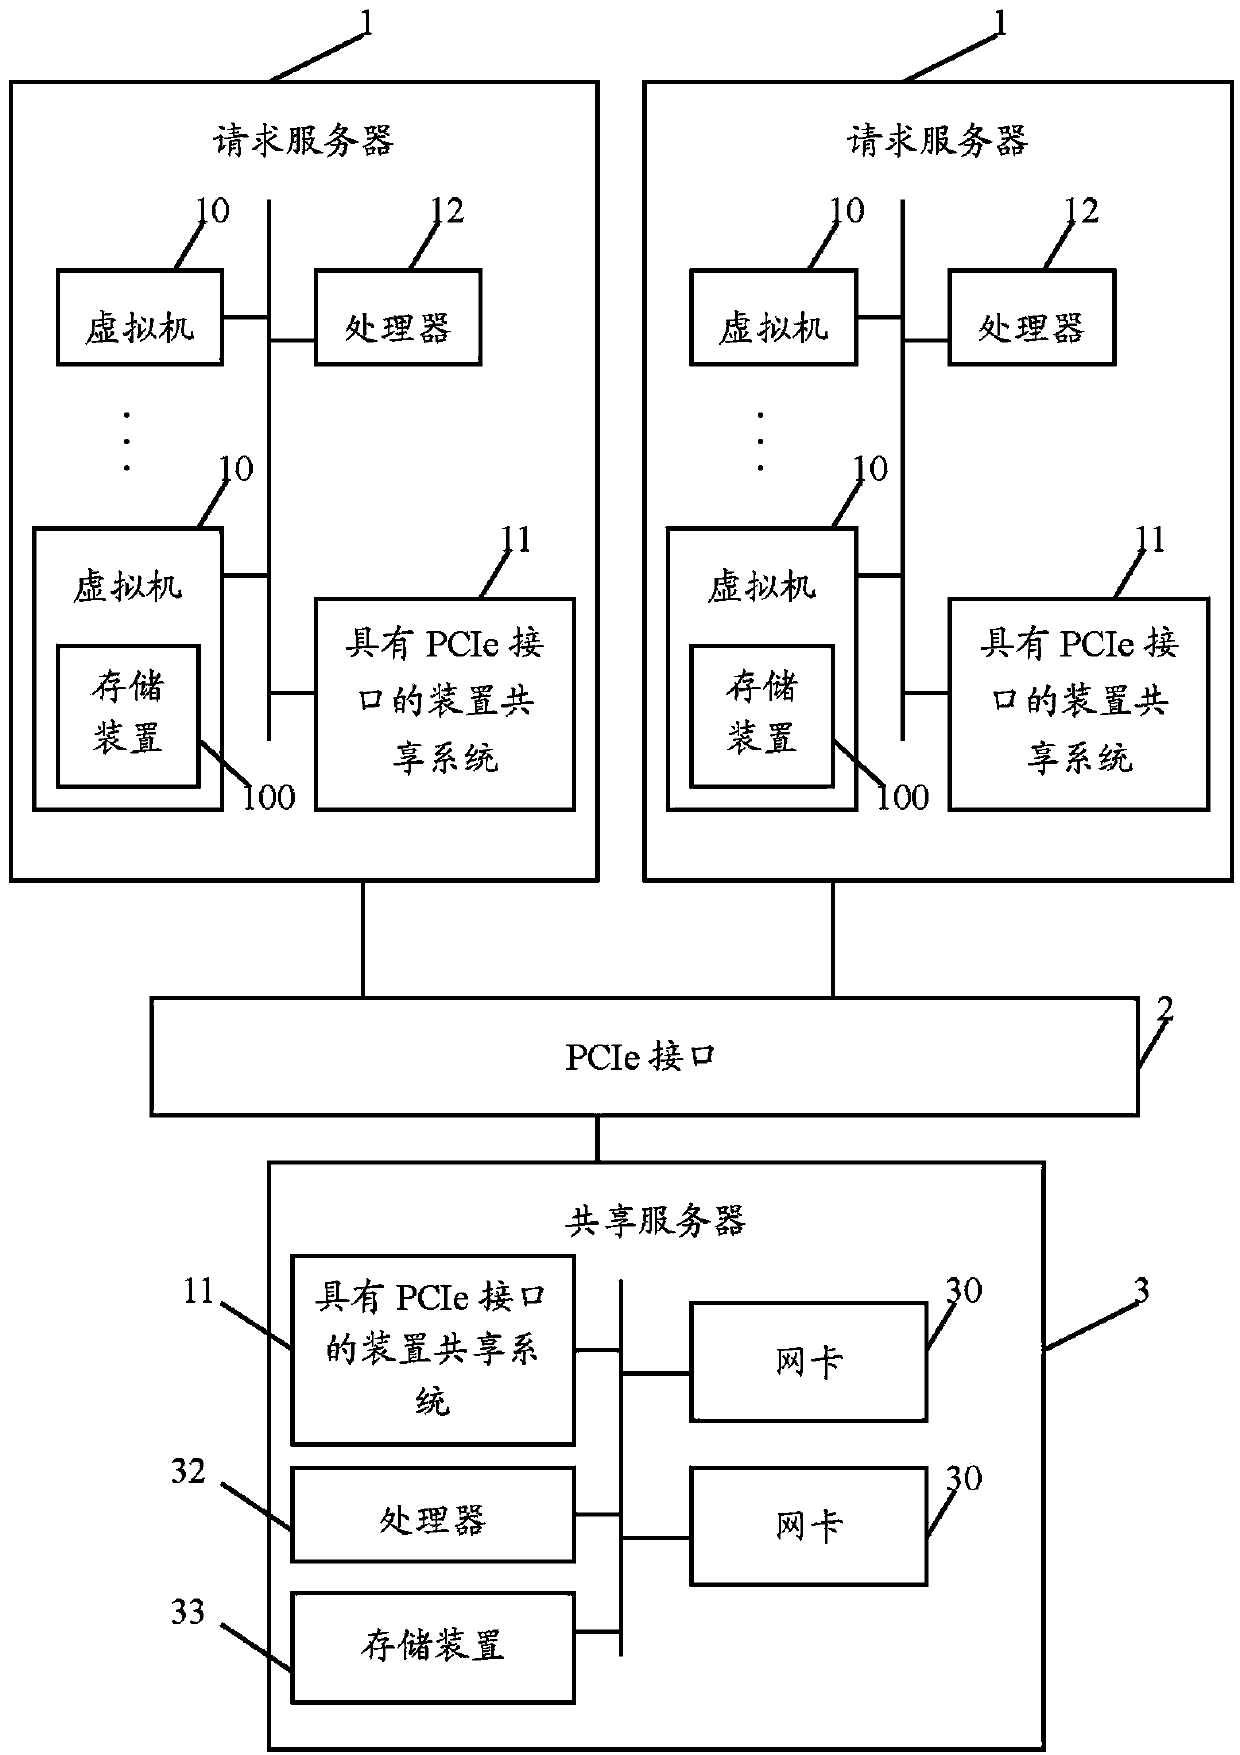 Device sharing system with PCIe interface and device sharing method with PCIe interface